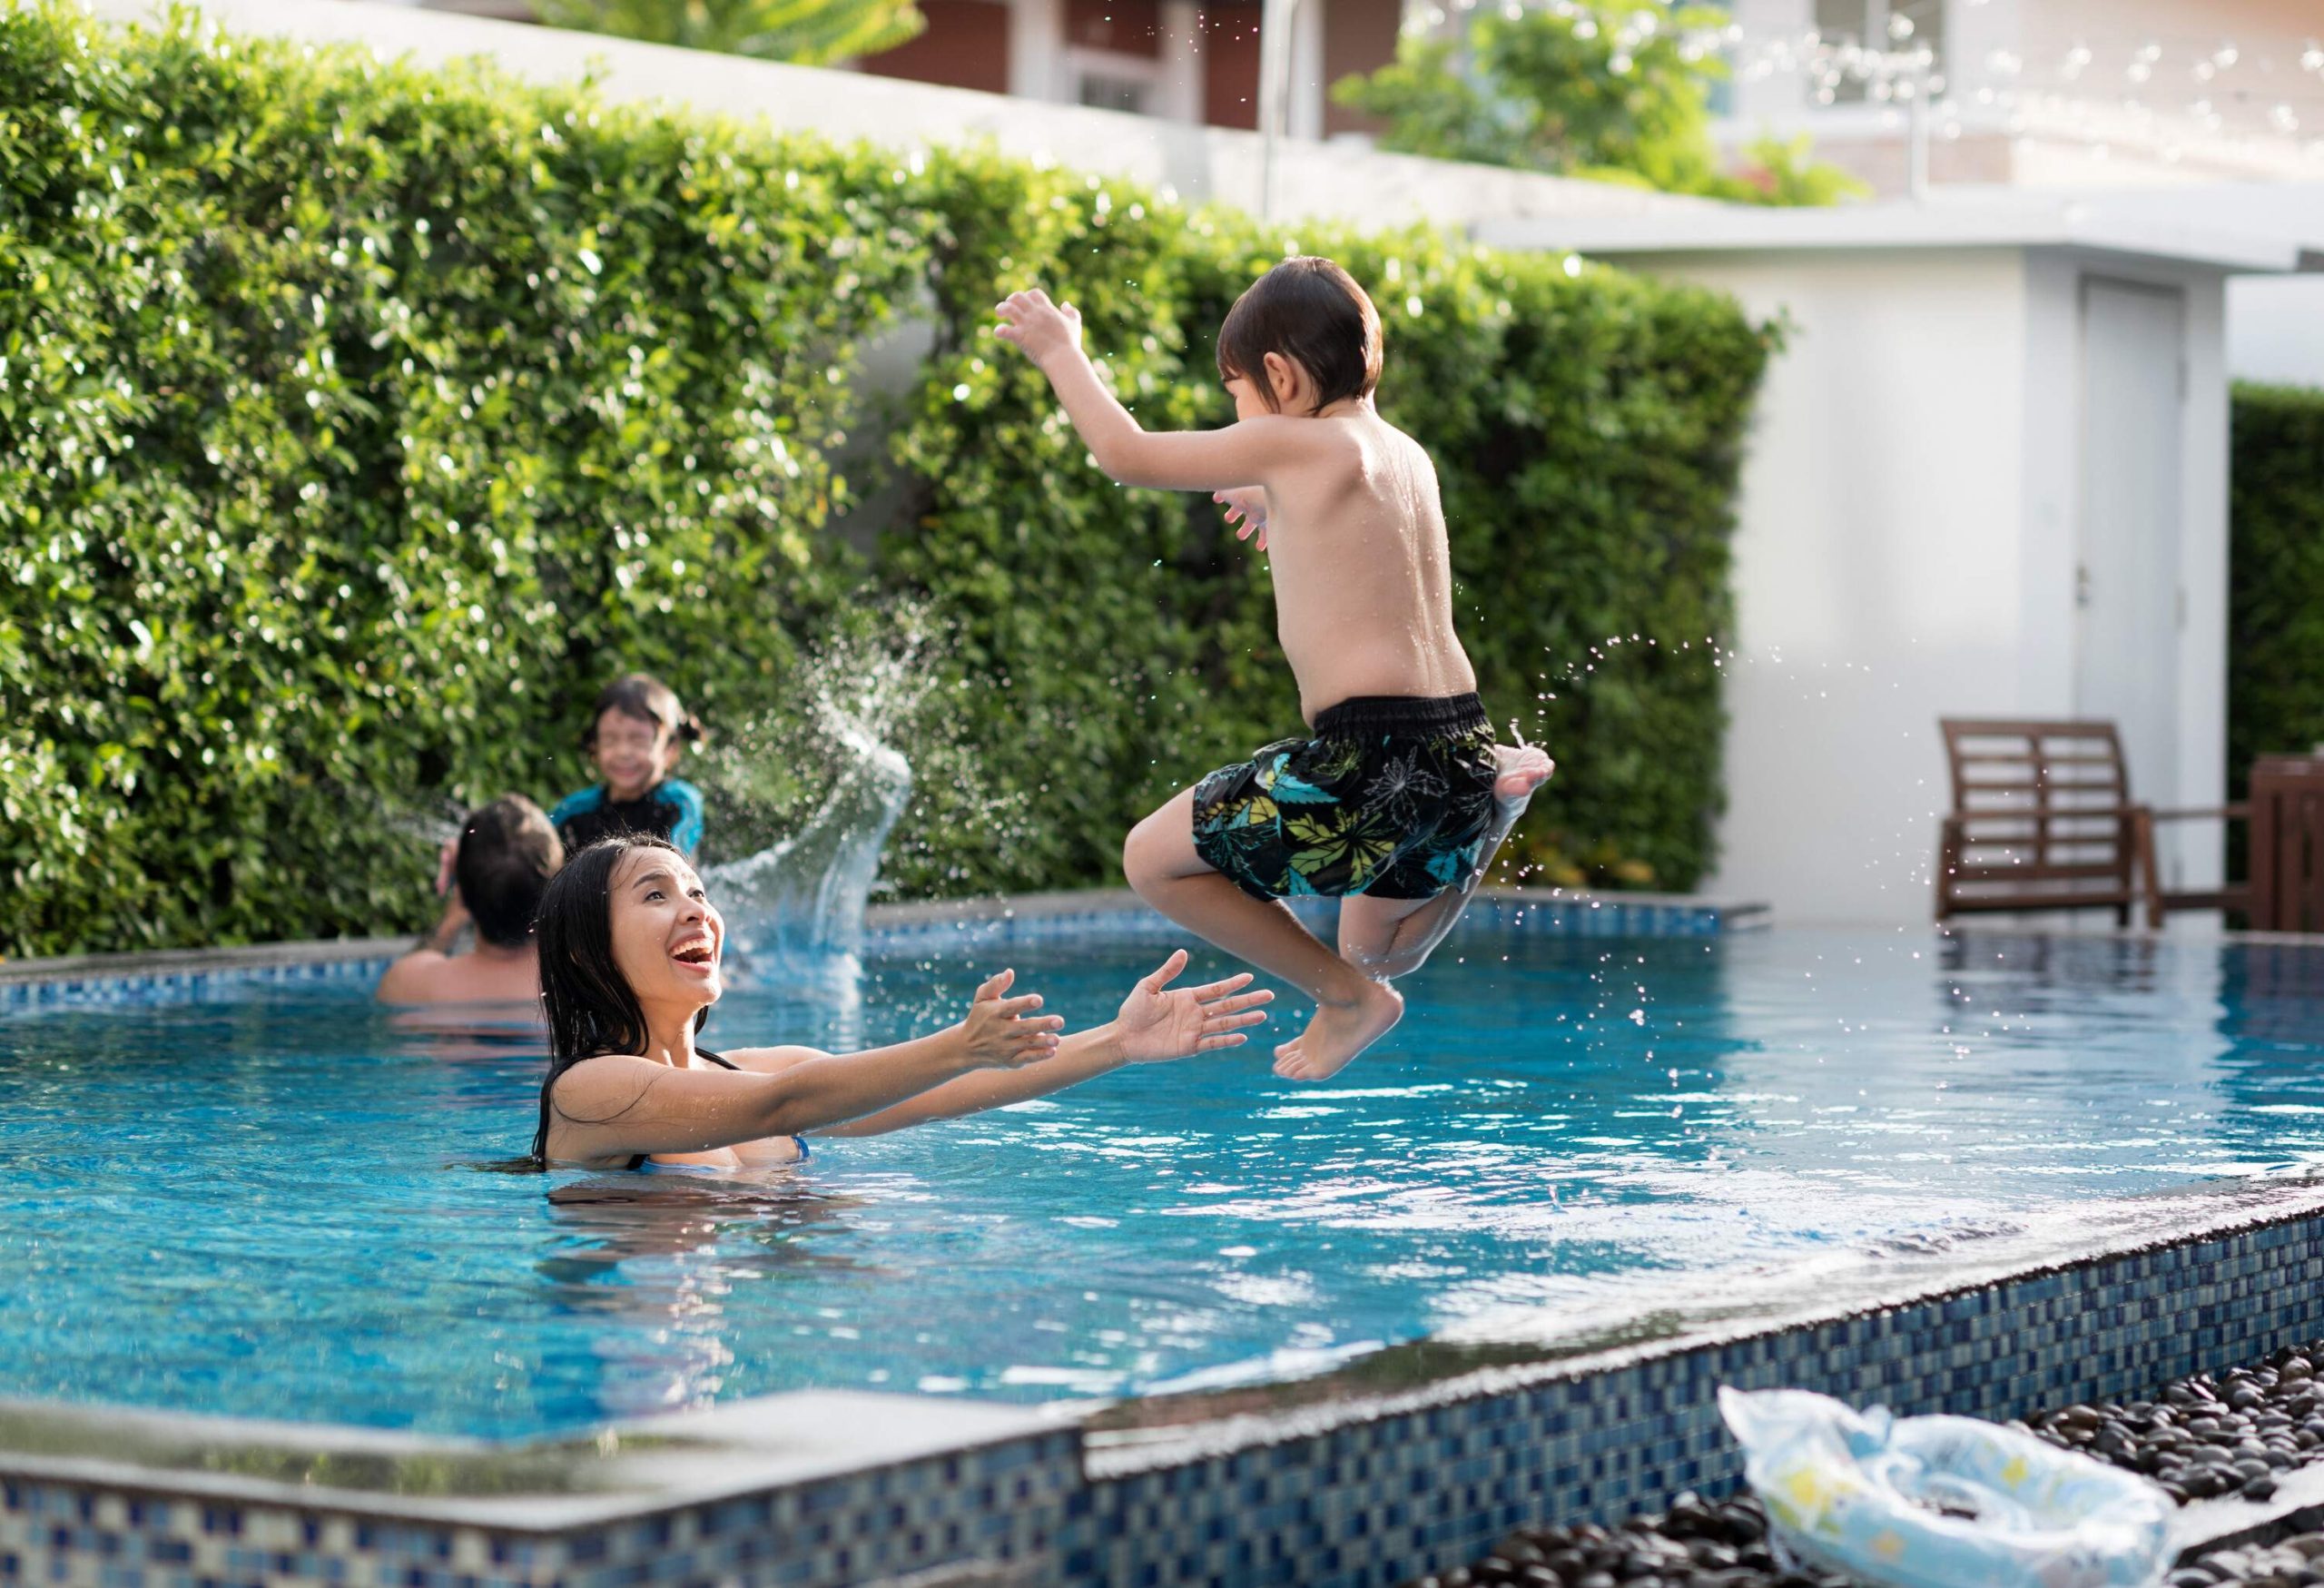 A mother waiting to catch her son as he jumps into the pool.